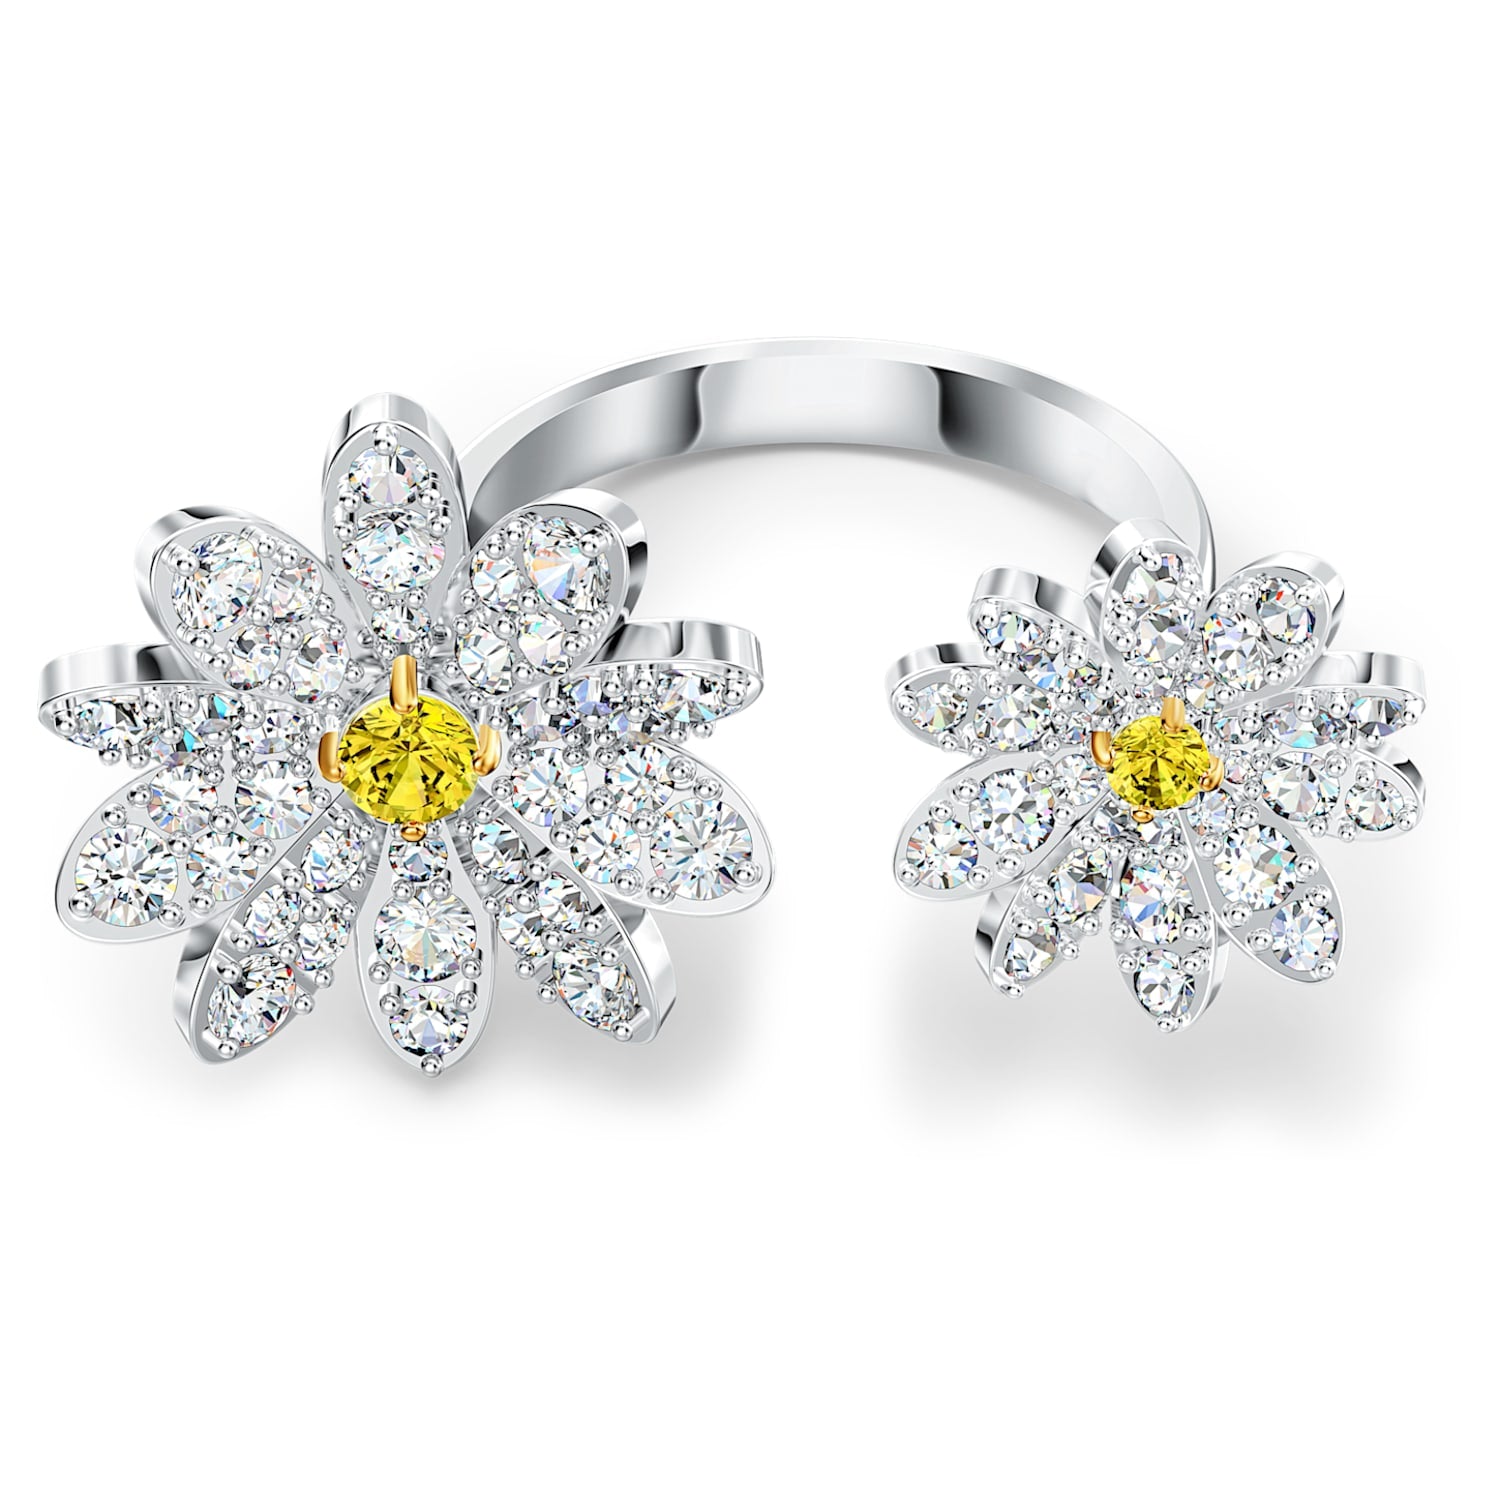 title:Swarovski Women's 5534940 Eternal Flower Finish Crystal Ring;color:not applicable